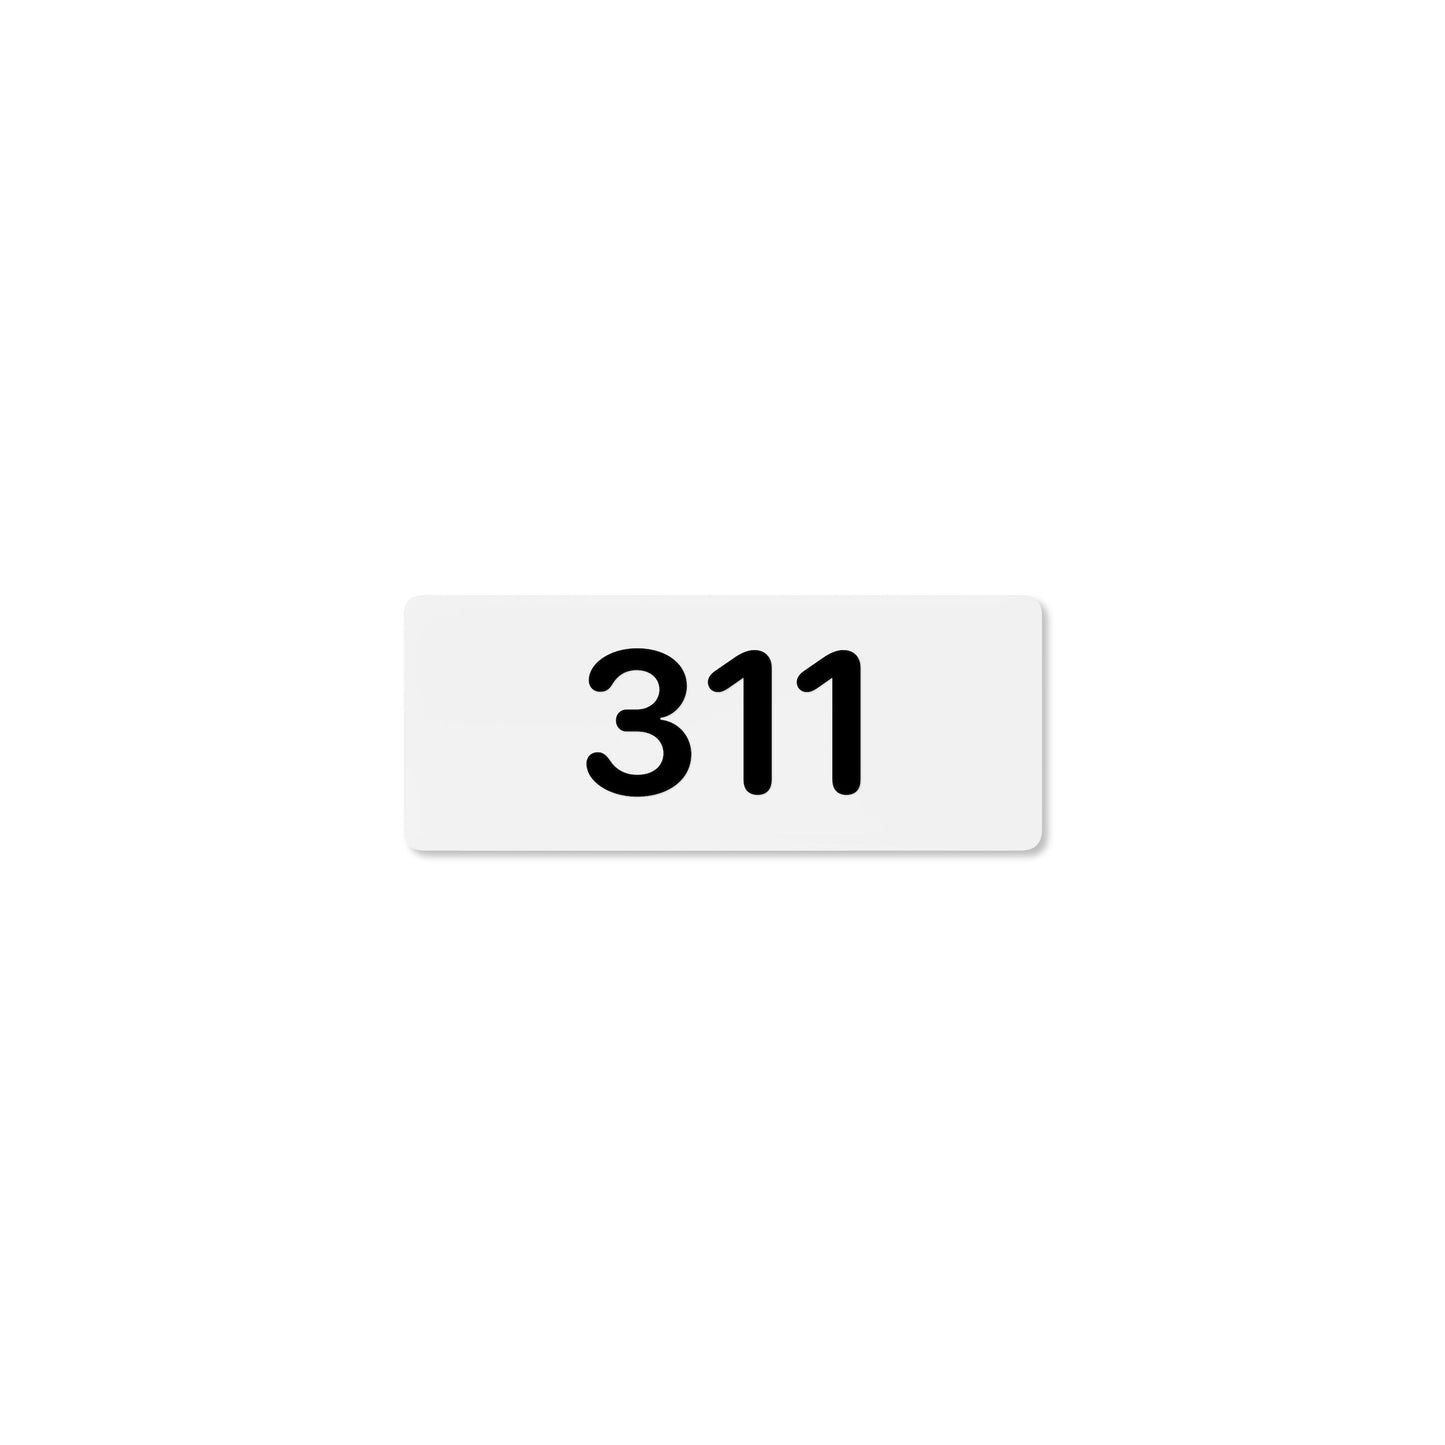 Numeral 311